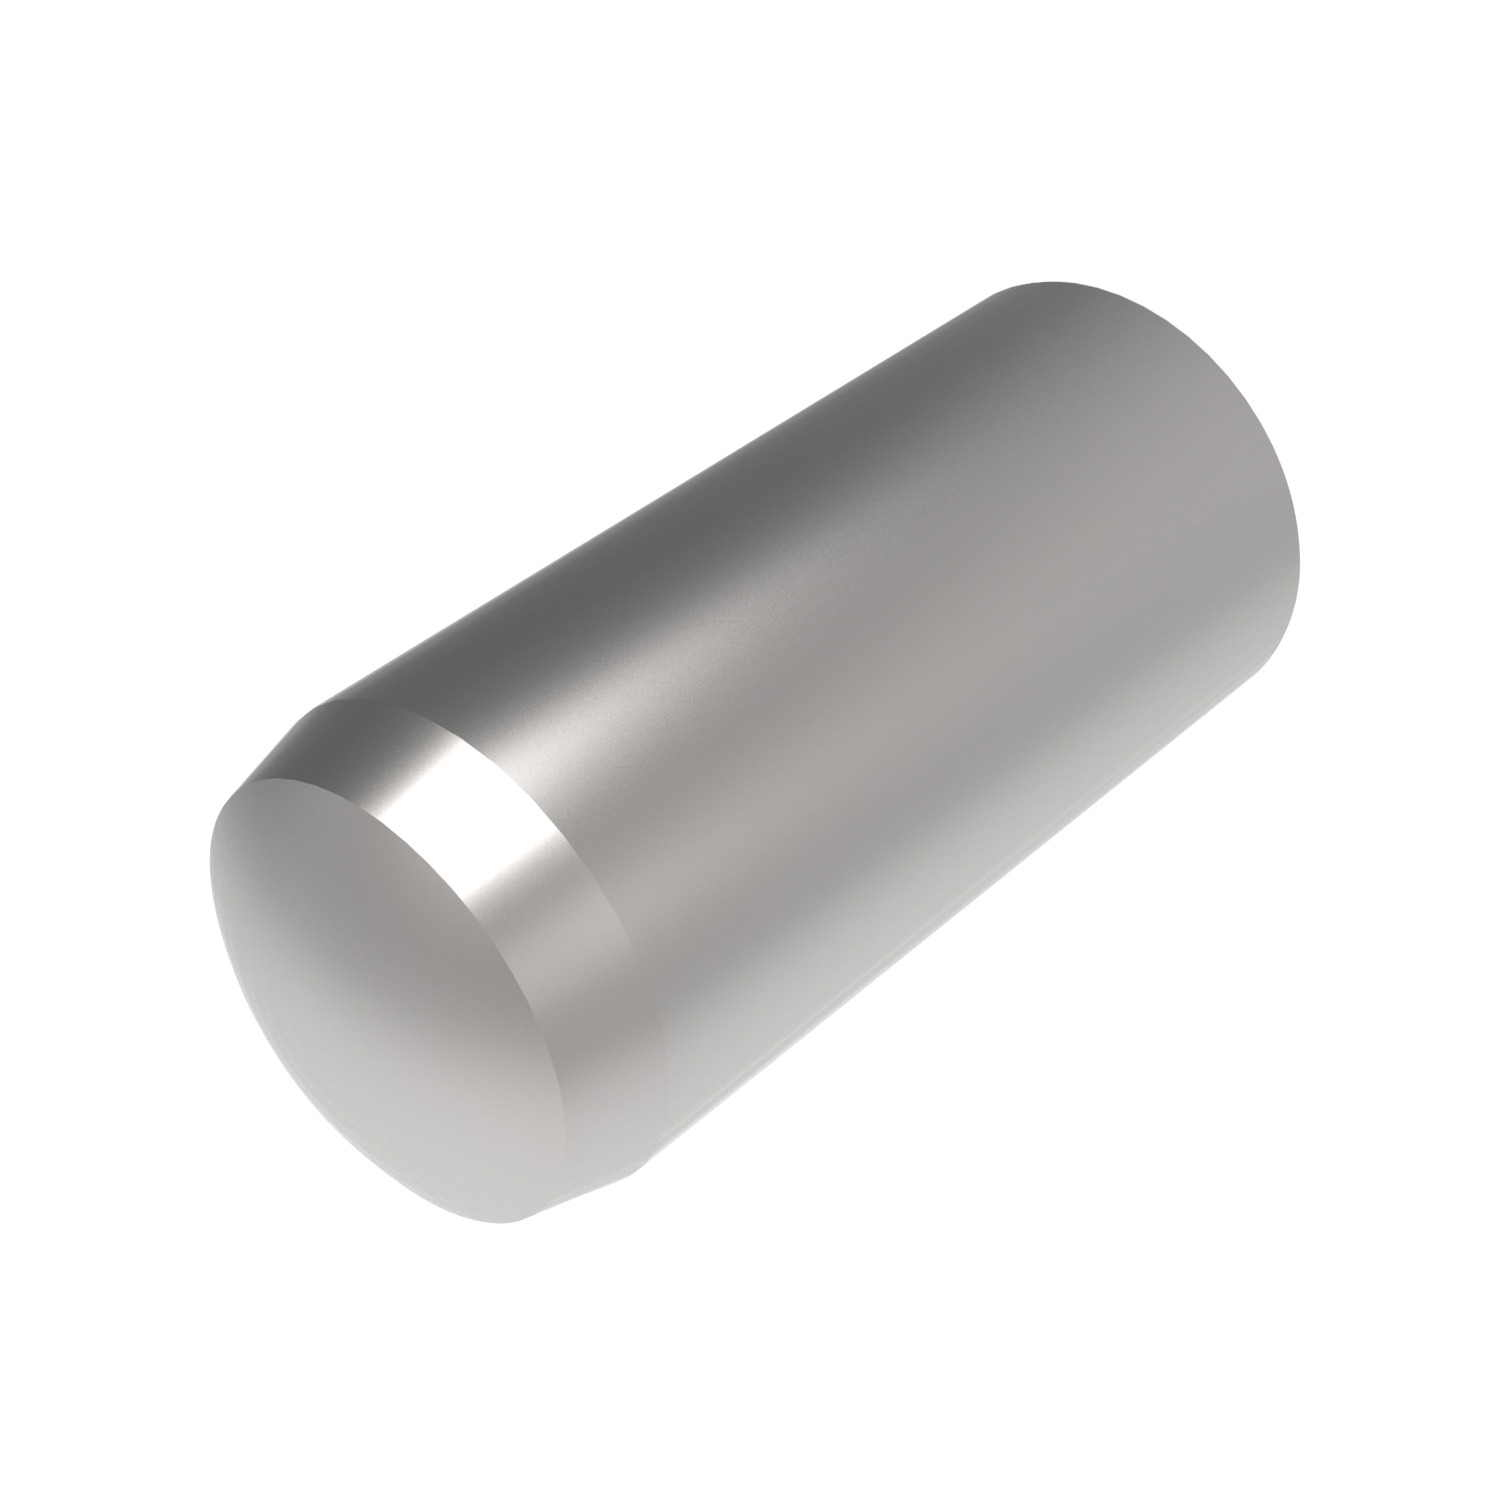 P1213 Stainless Extractable Dowel Pins